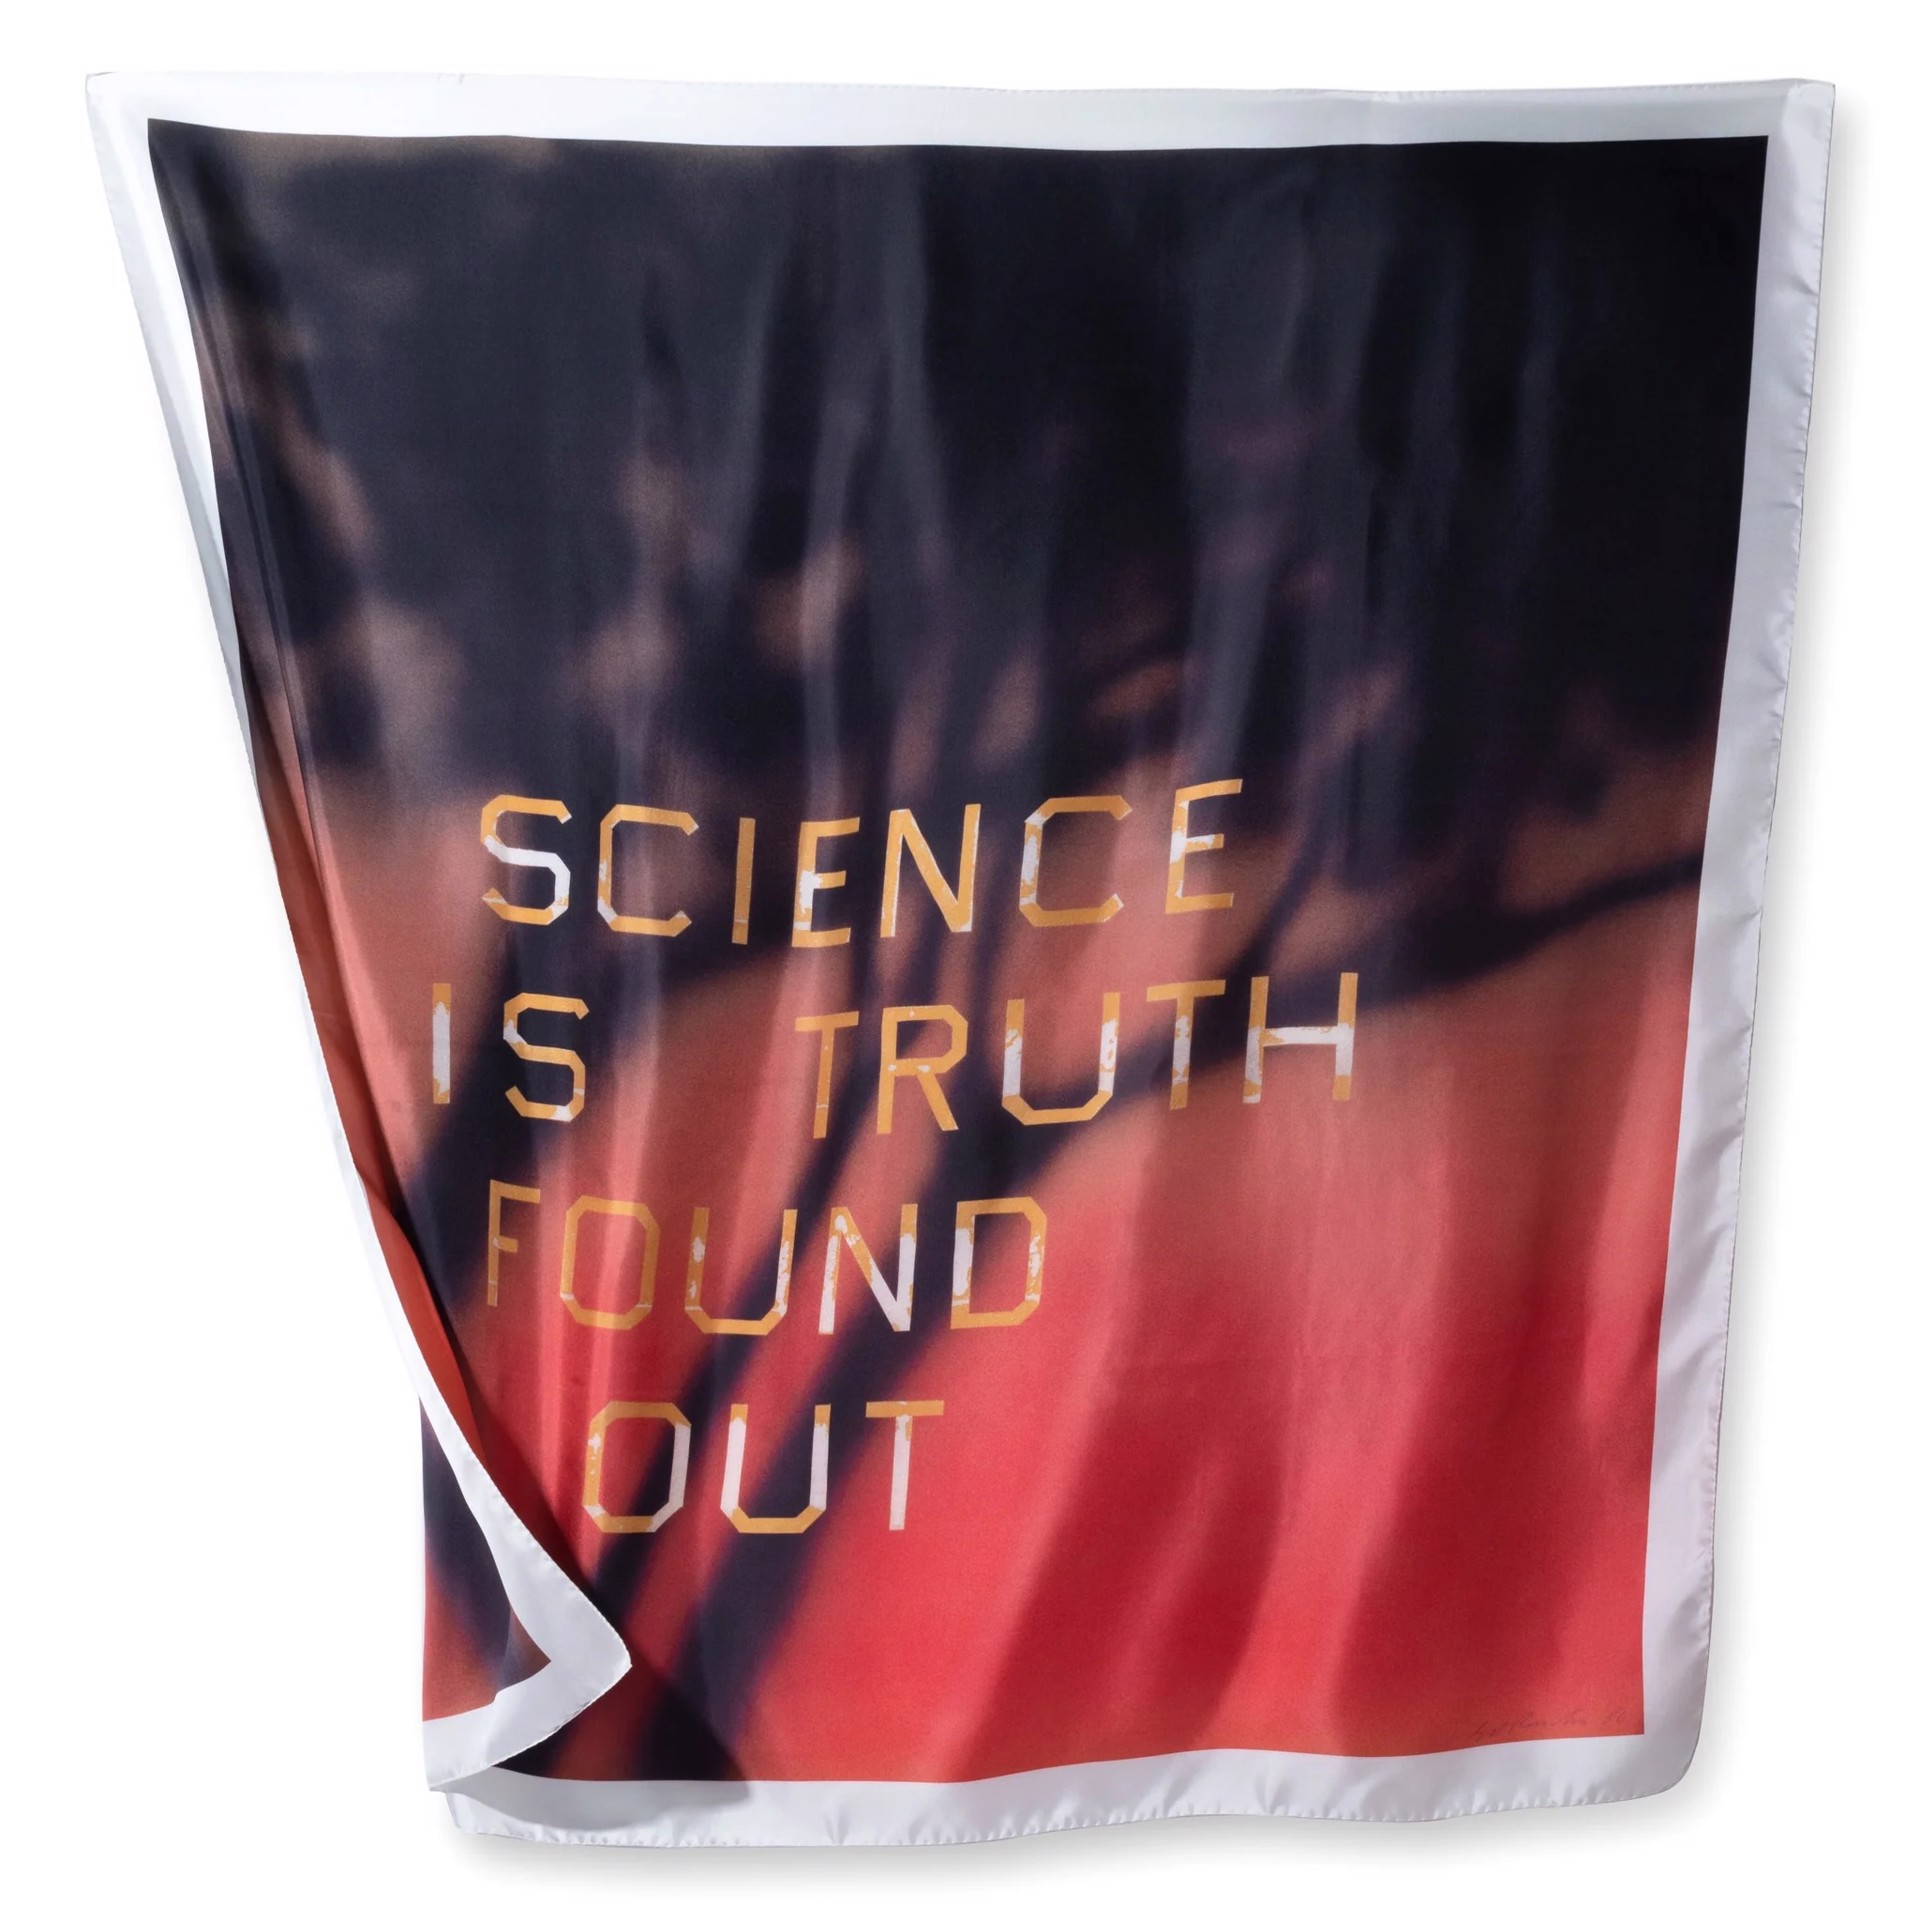 Truth Is Science Found Out by Ed Ruscha